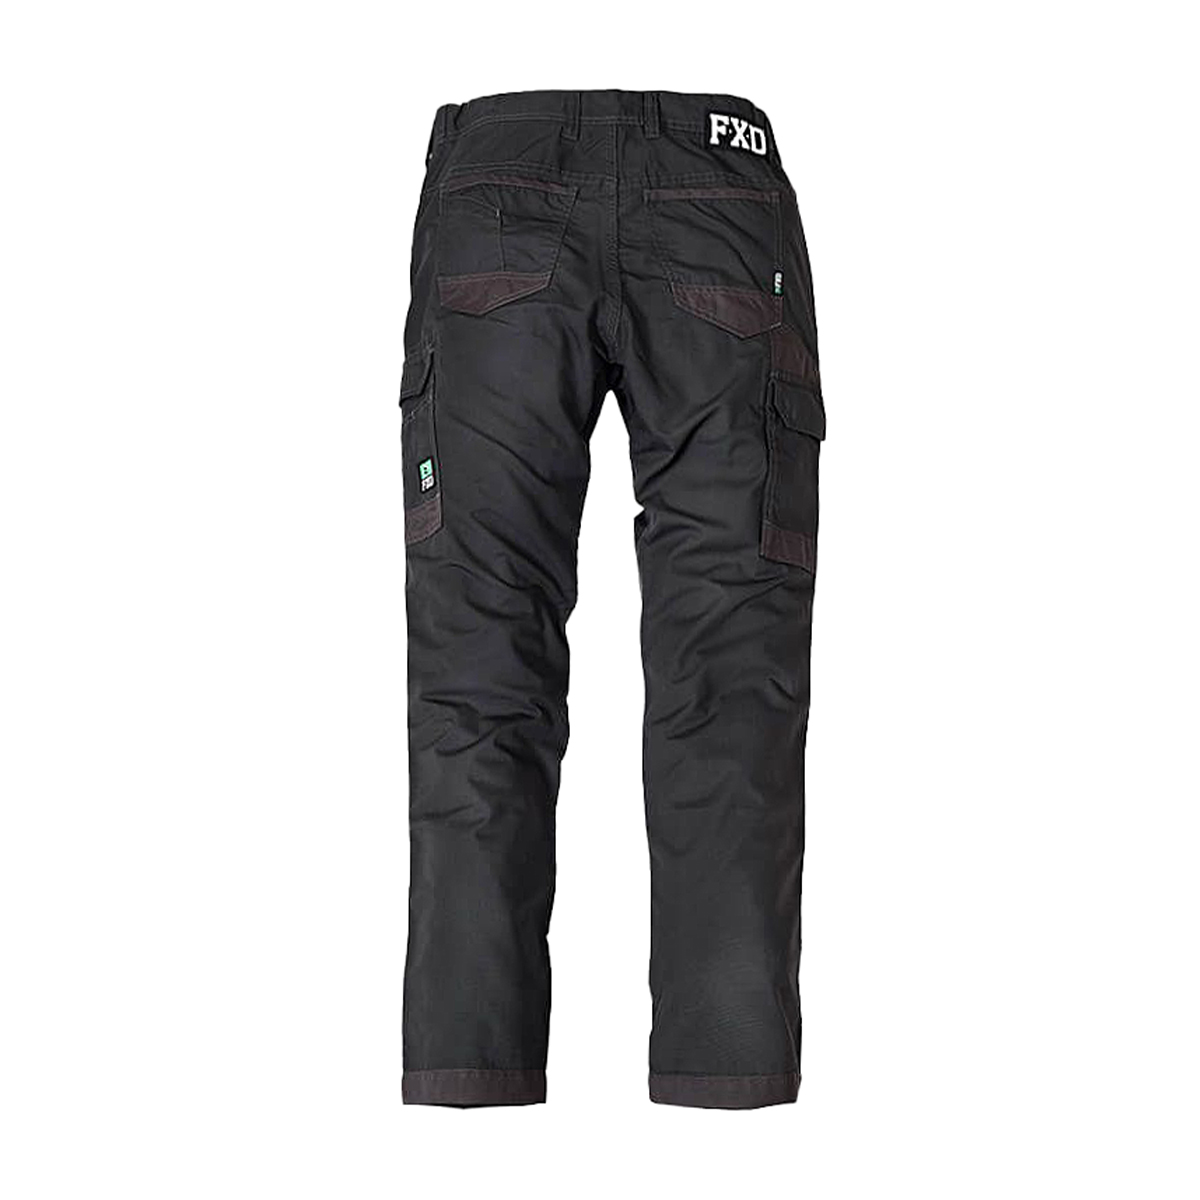 FXD Lightweight Stretch Cargo Pant WP-5 - The Workers Shop